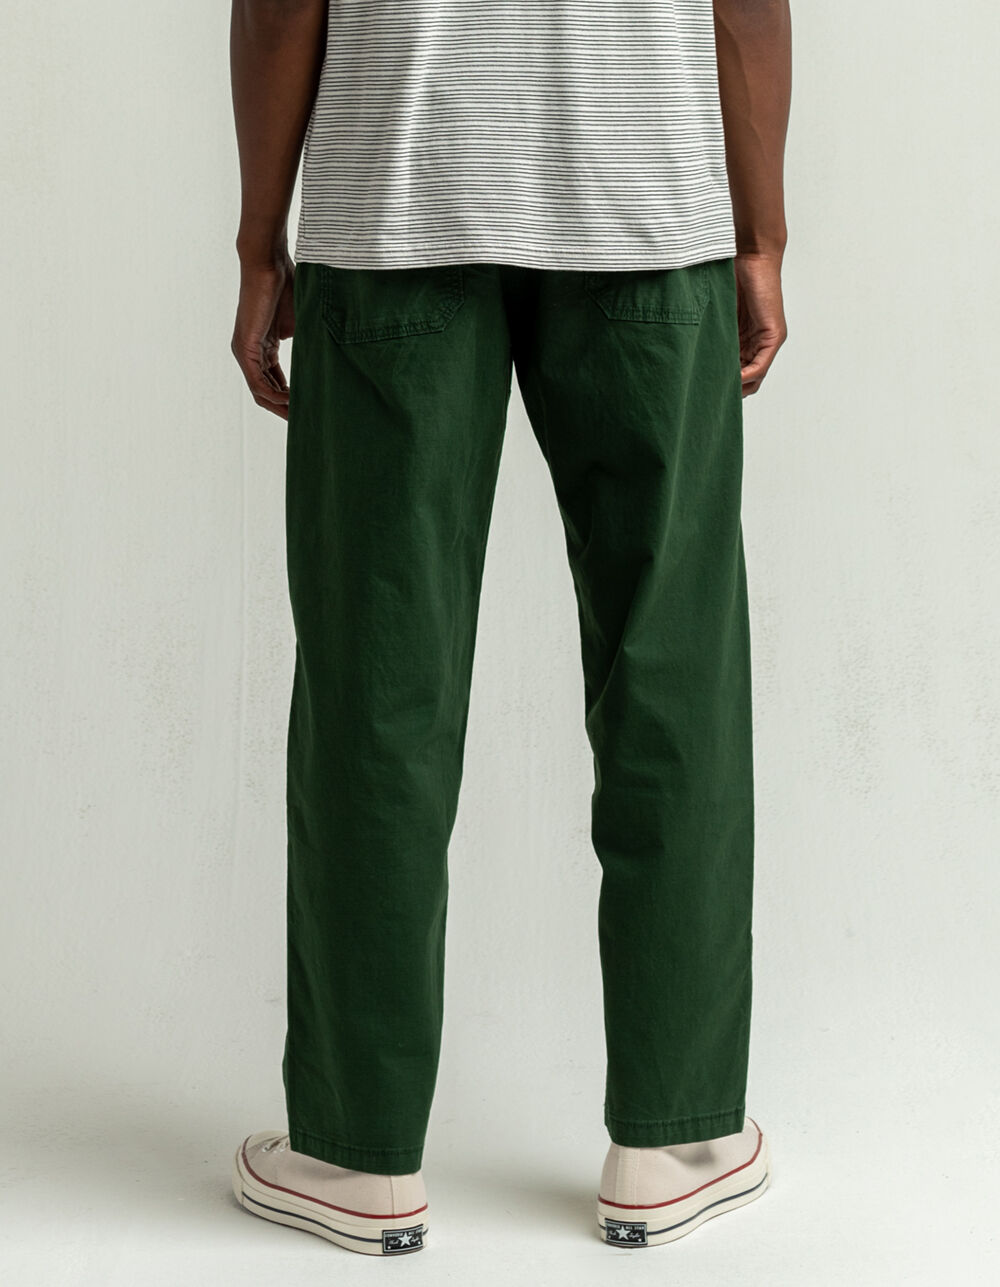 LEVI'S Ripstop Field Mens Pants - ARMY | Tillys